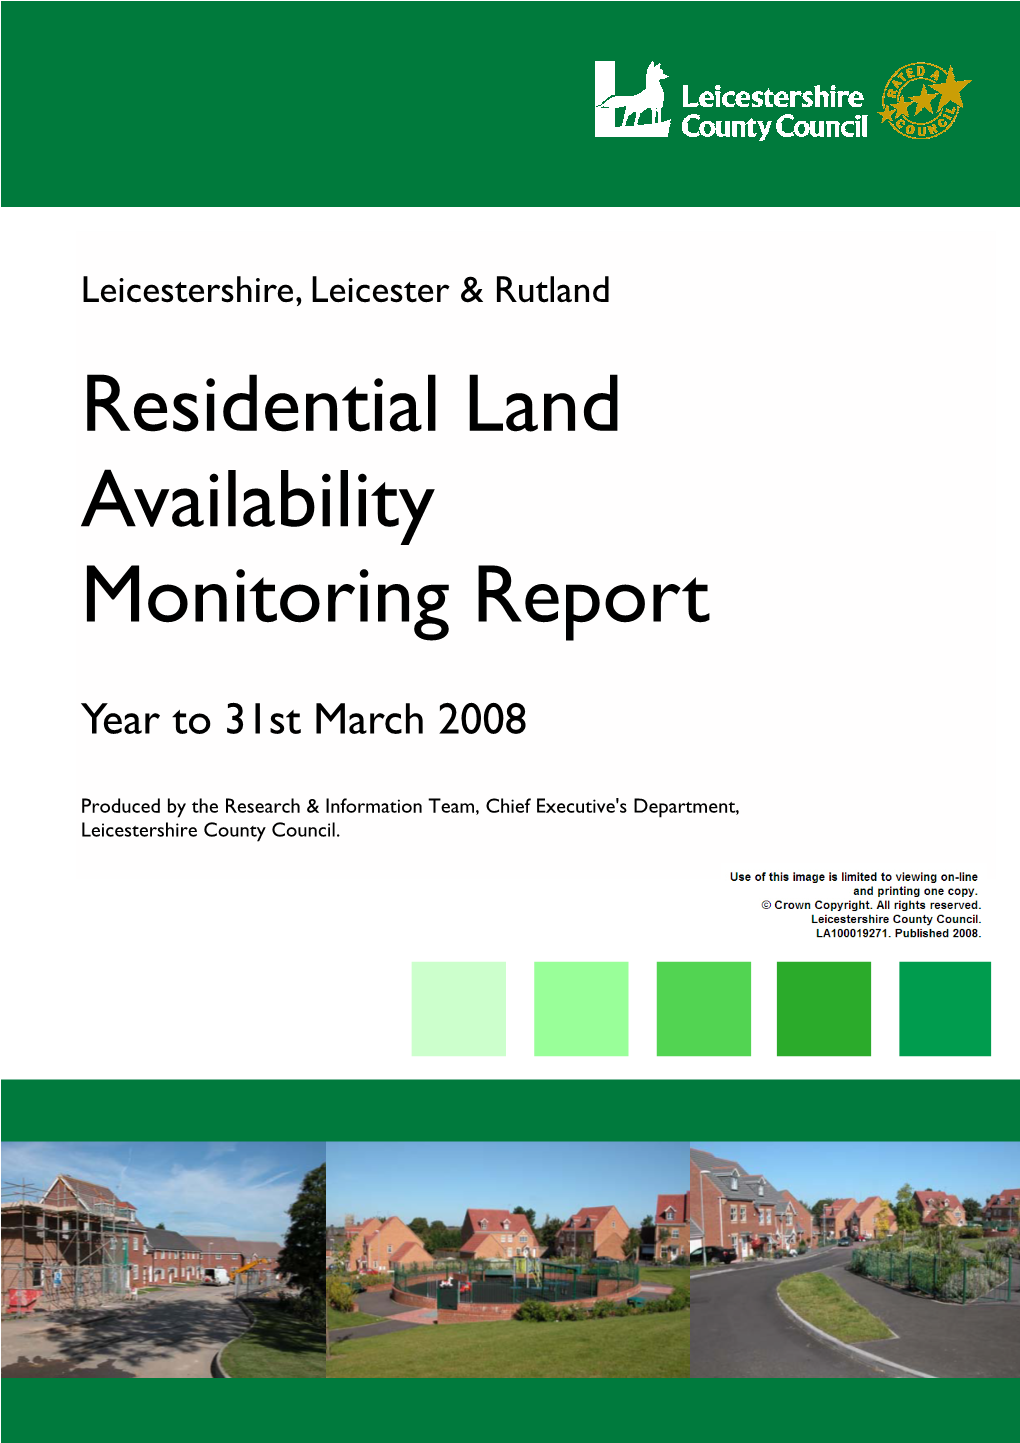 Residential Land Availability Report 2008